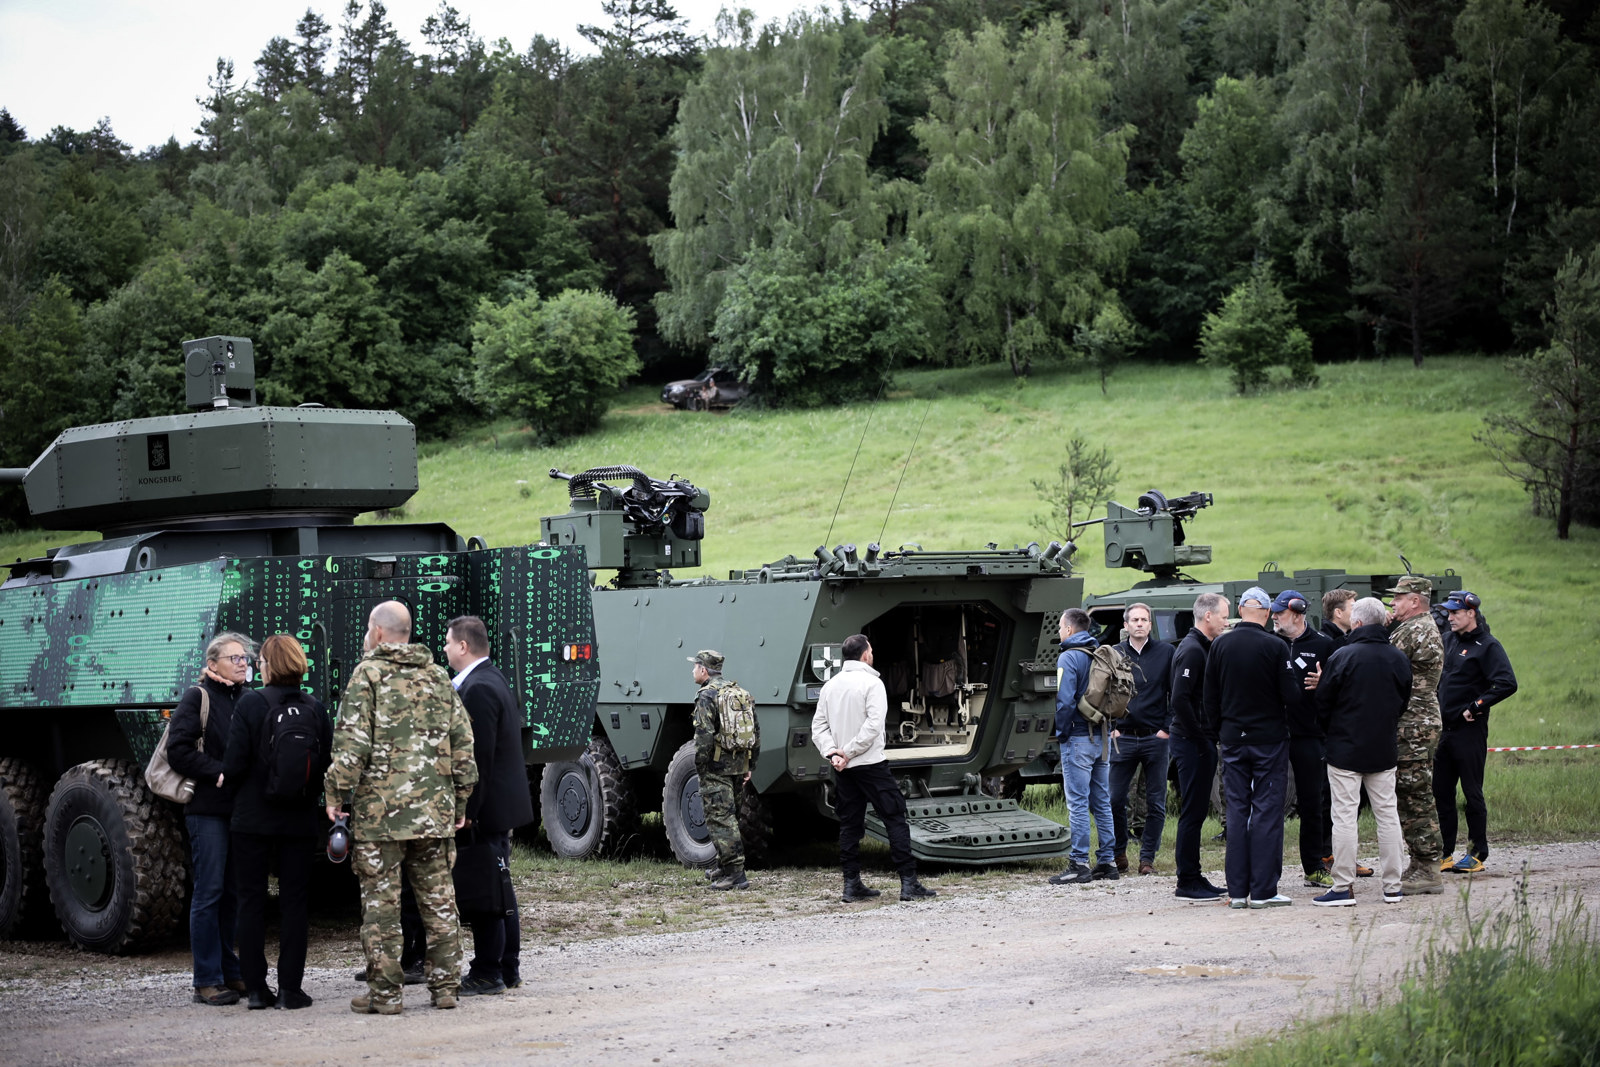 The live fire demonstration was held at the Slovenian Armed Forces' main training area - Poček Military Training Ground outside of Ljubljana. 